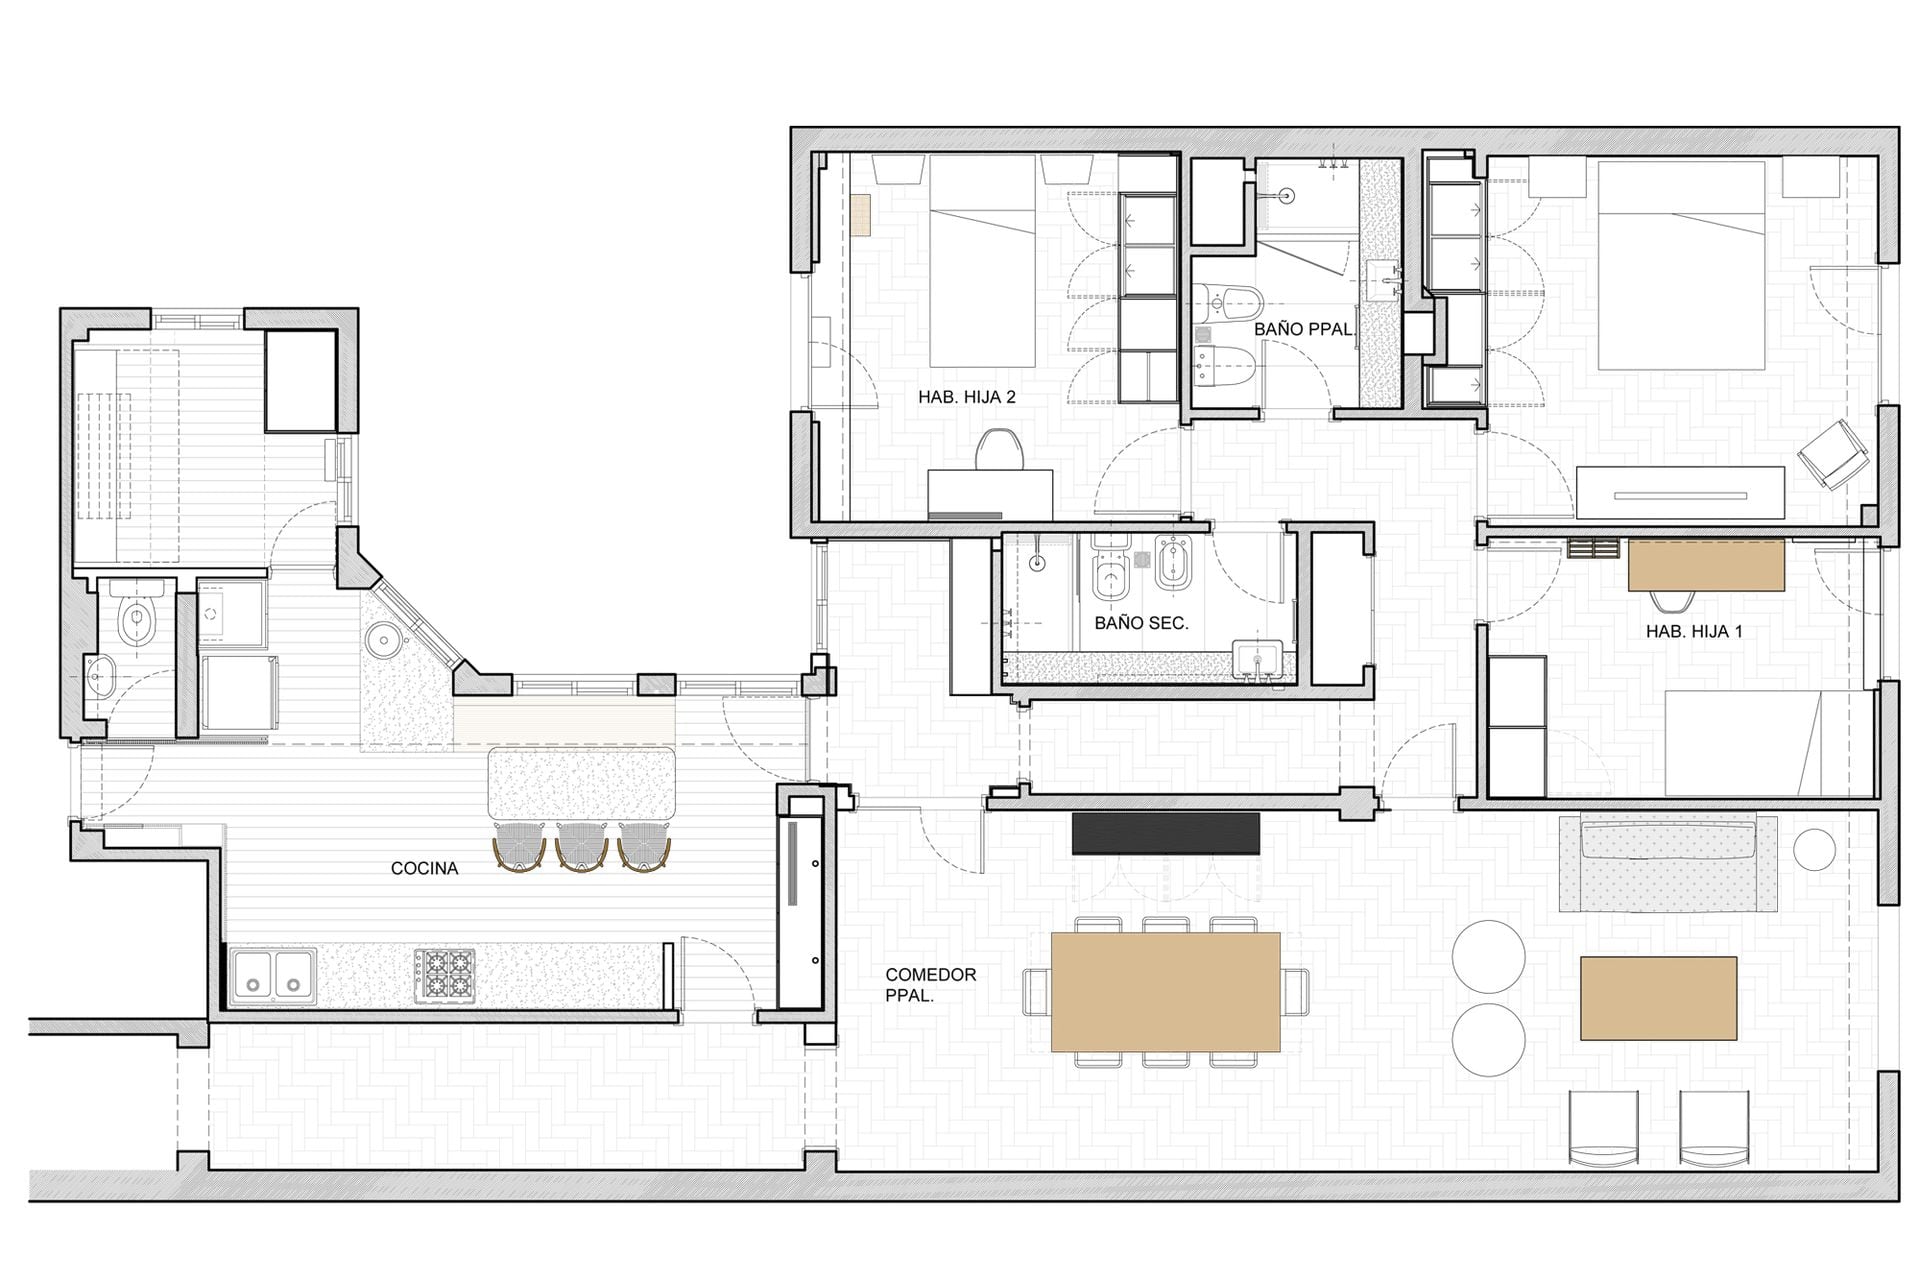 The complete floor plan of a tailor-made reform: the kitchen as a compact and functional unit, the social environment renovated and the rooms with the redesigned bathrooms. 